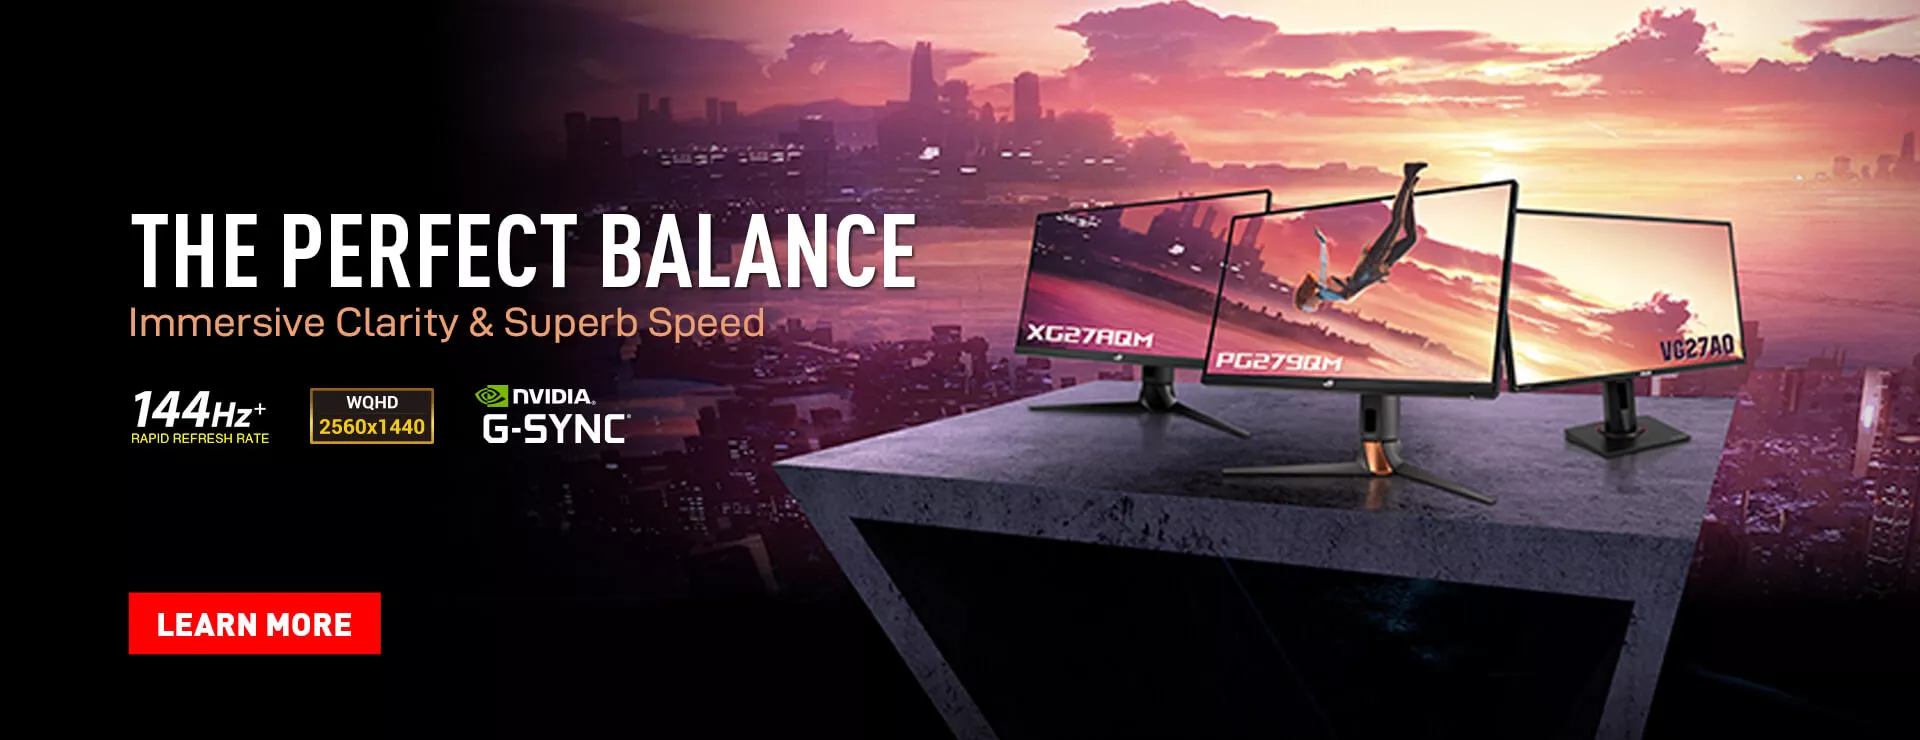 The ROG and TUF gaming 1440P gaming monitor lineup photo with a Nvdia G-sync logo